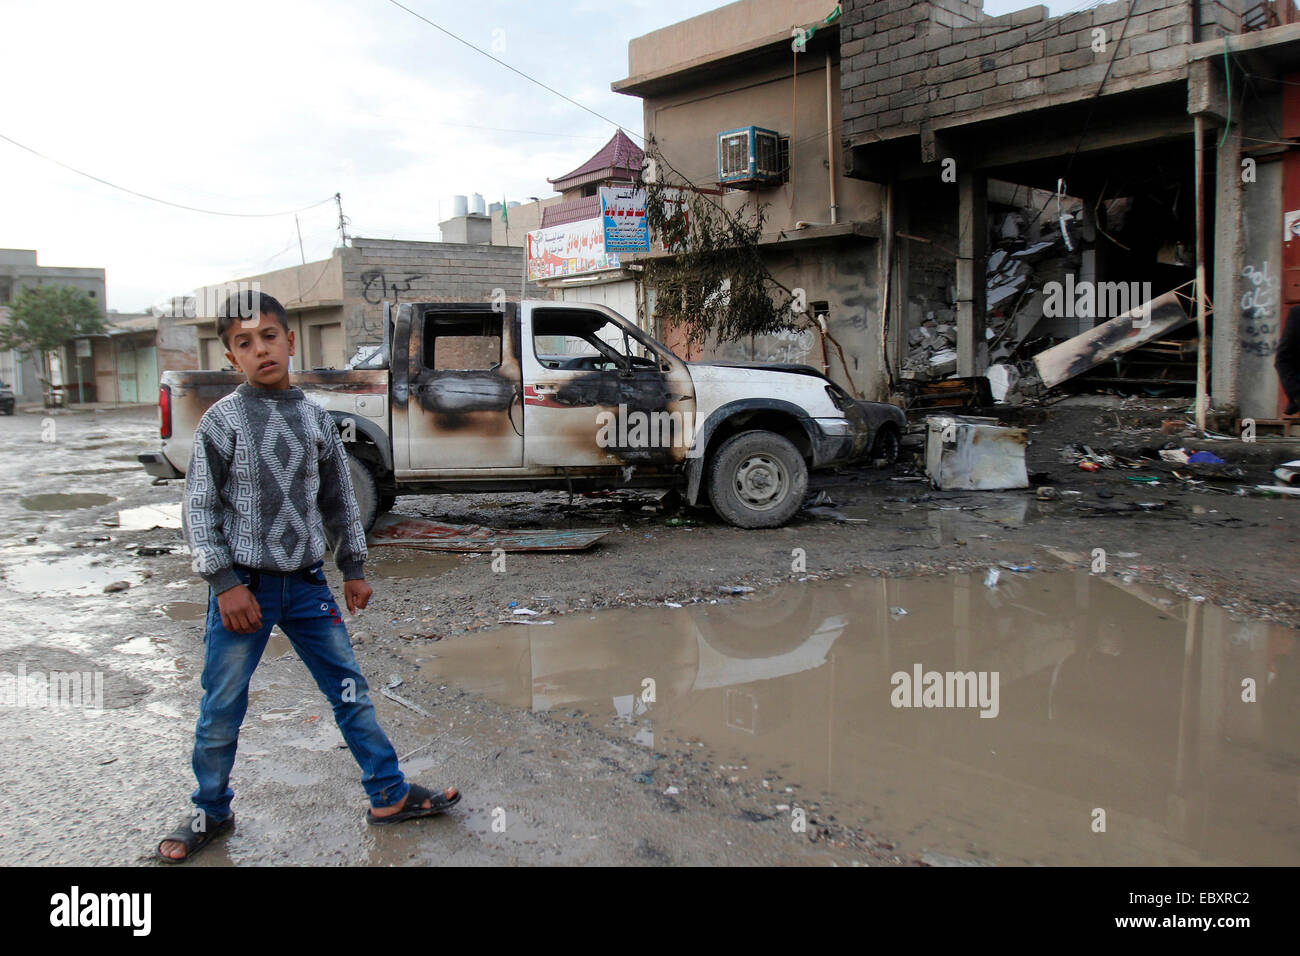 Kirkuk, Iraq. 5th Dec, 2014. A boy stands in front of a damaged car at an explosion site in the city of Kirkuk, Iraq, Dec 5, 2014. A suicide bomber with an explosive vest blew himself up in a cafe in the northern Iraqi city of Kirkuk, killing at least 15 people and wounding 20 others on Dec. 4, a local police told Xinhua on condition of anonymity. © Dena Assad/Xinhua/Alamy Live News Stock Photo